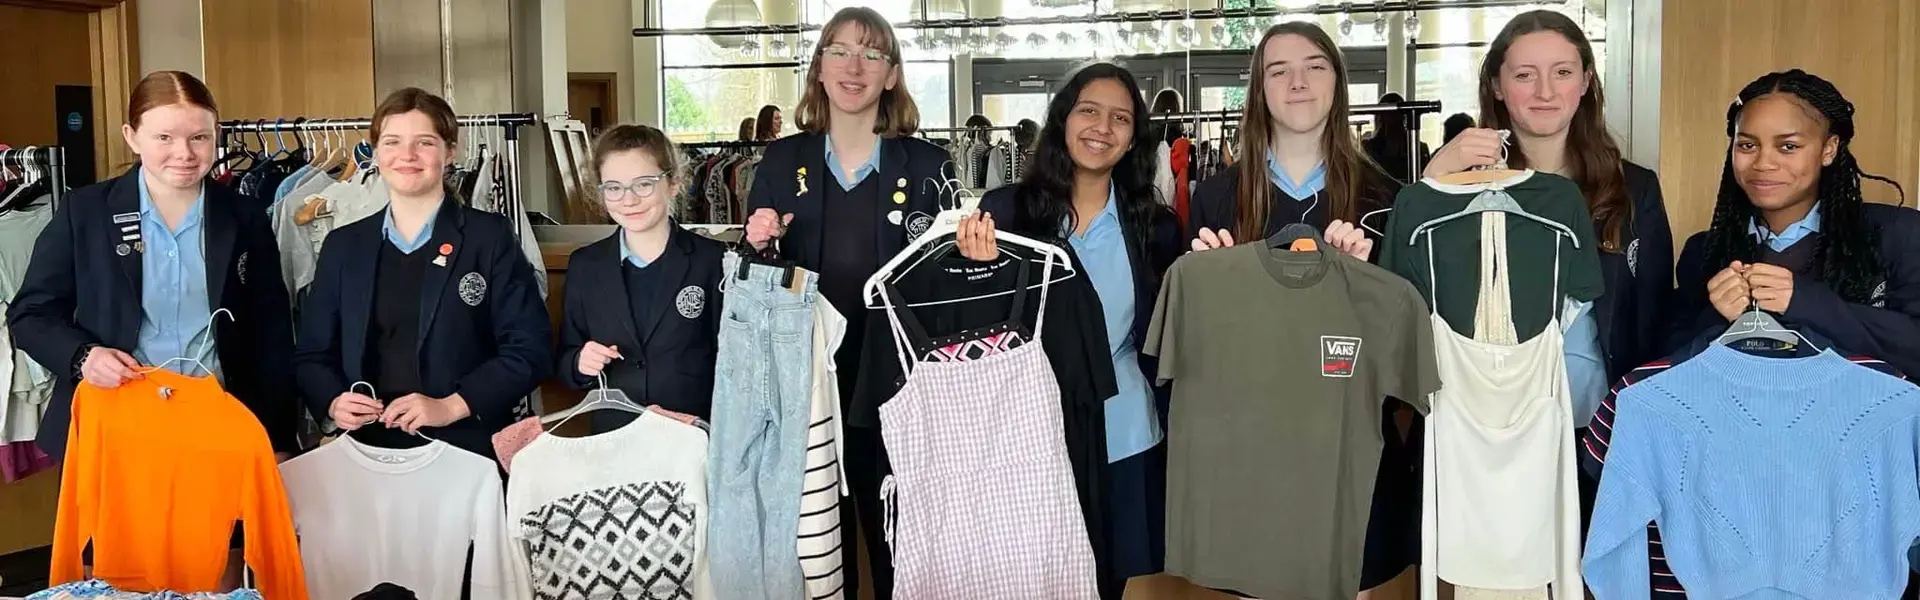 The Eco Society, in collaboration with FIPS, orchestrated Ibstock's second annual Clothes Swap in the theatre foyer of Ibstock Place School, Roehampton.